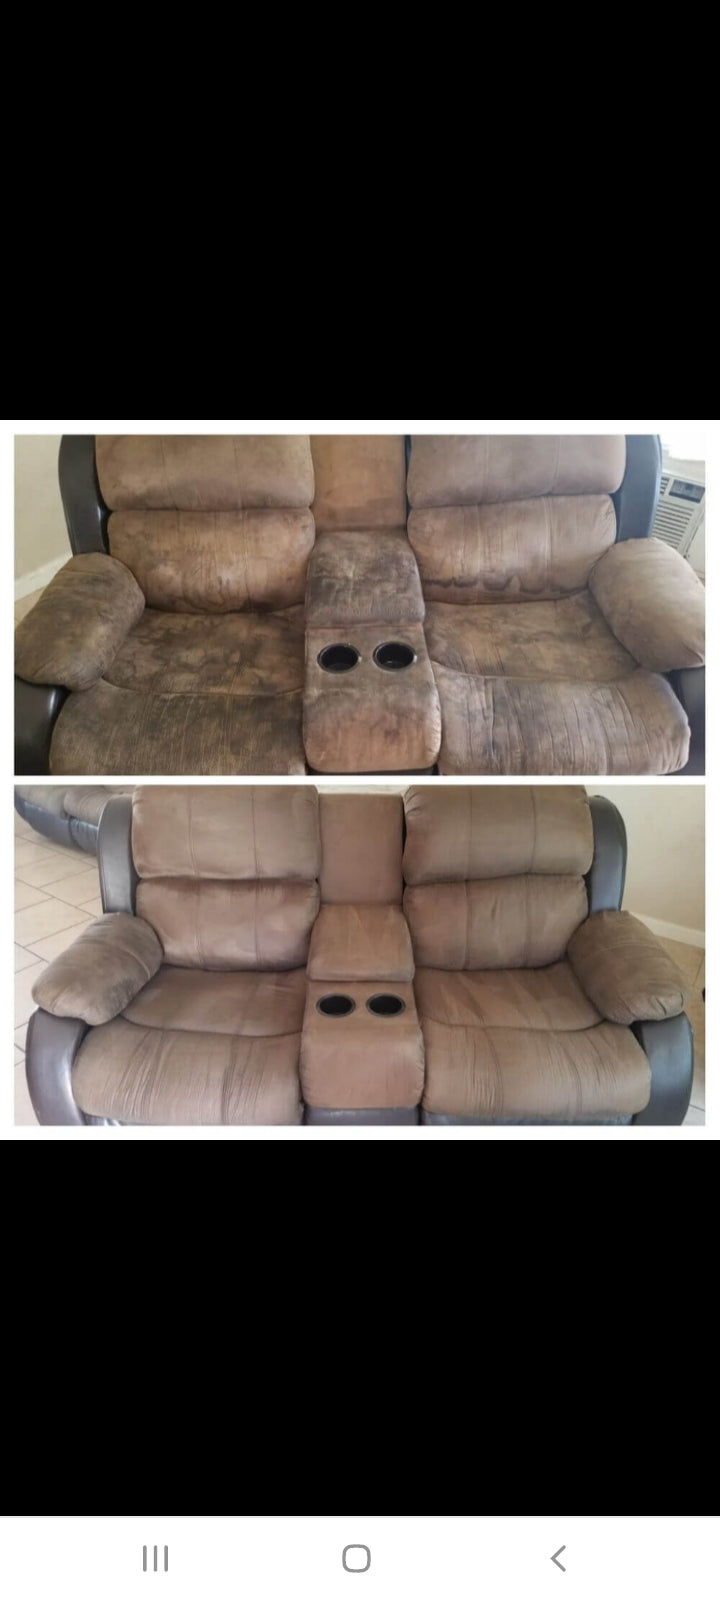 2 Piece Couch Cleaning Sale $150